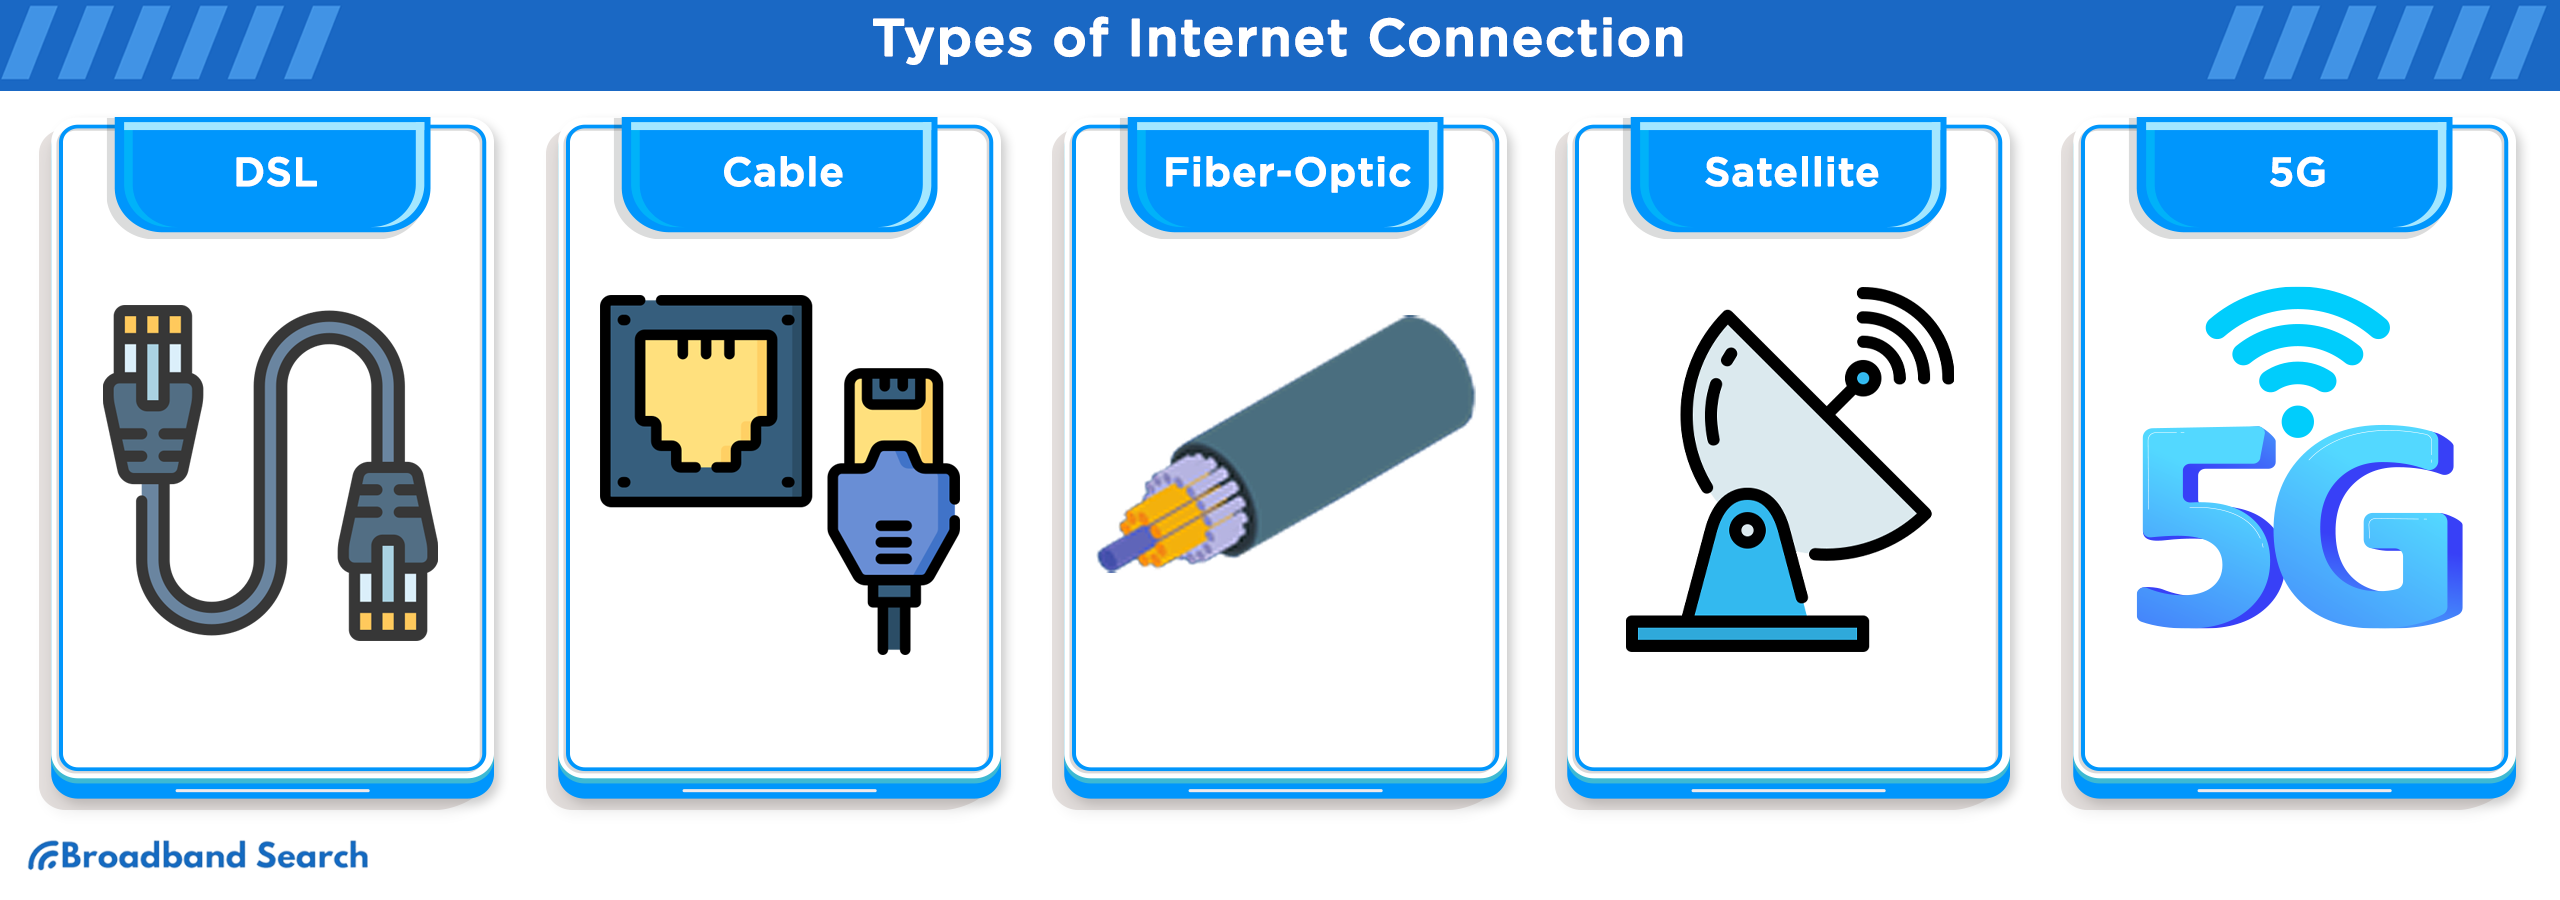 Types of Internet connection